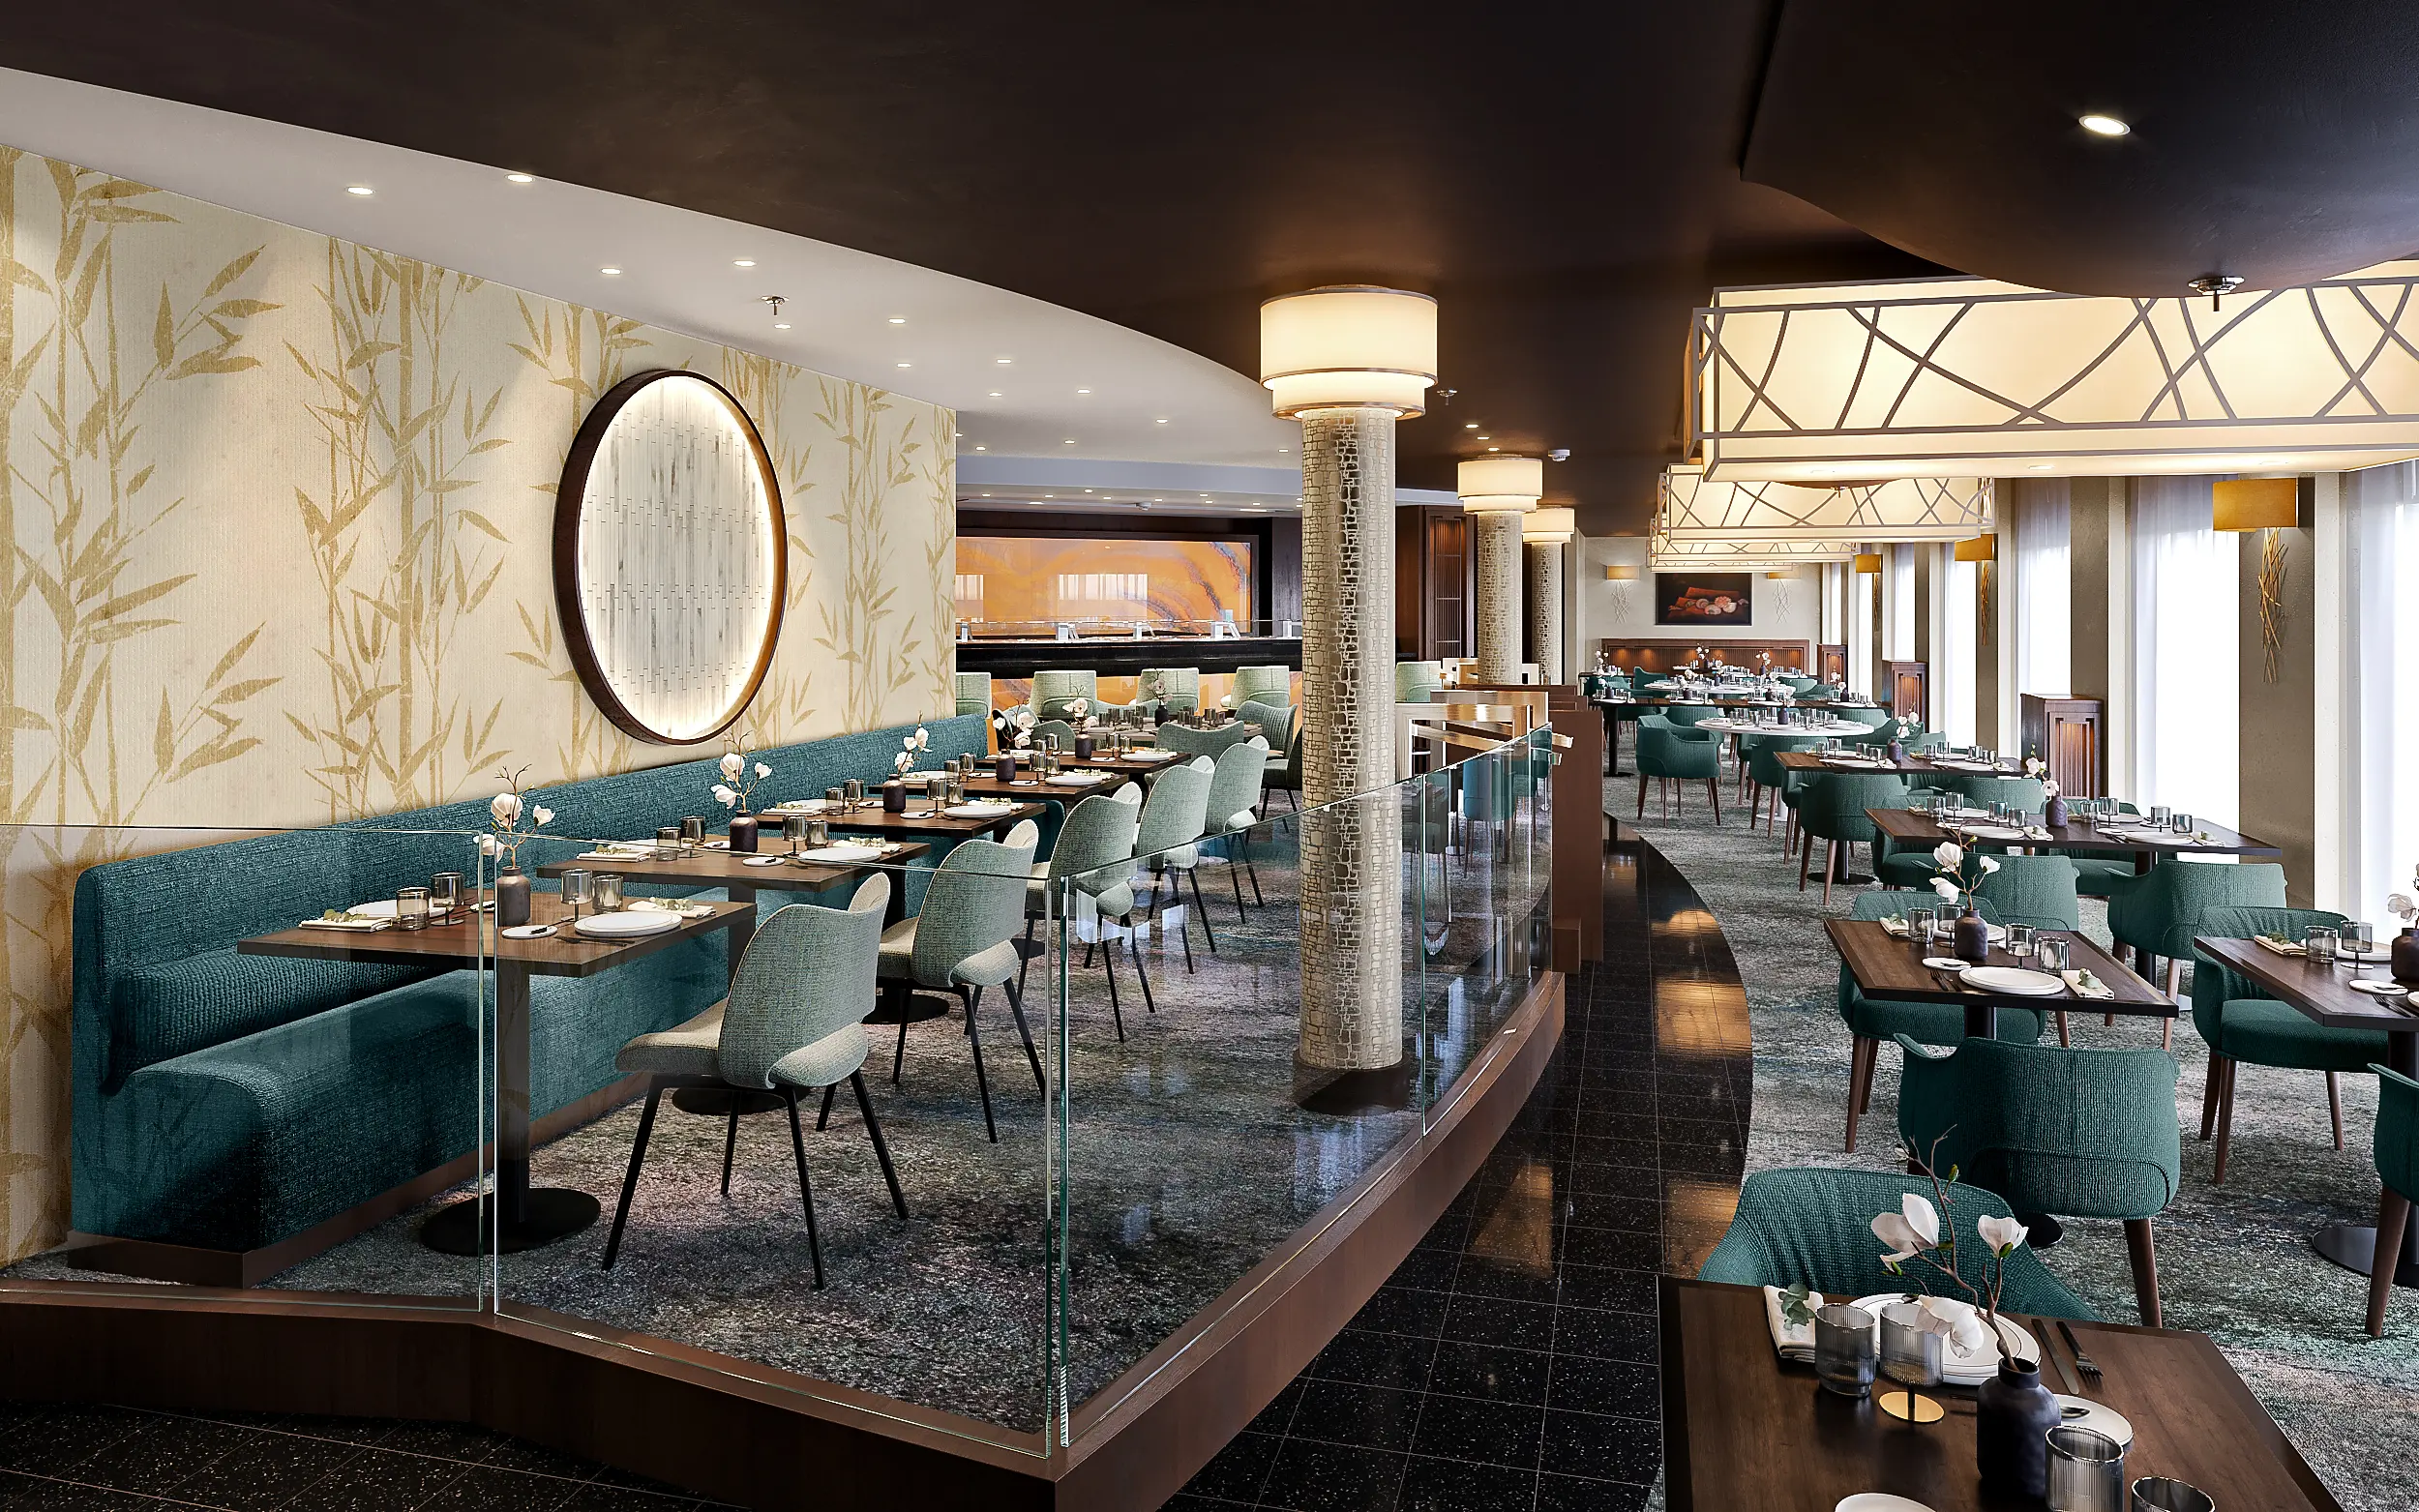 Tillberg’s use of the Mediterranean color palette plus their attention to details make Umi Uma one of the most coveted restaurants at sea.